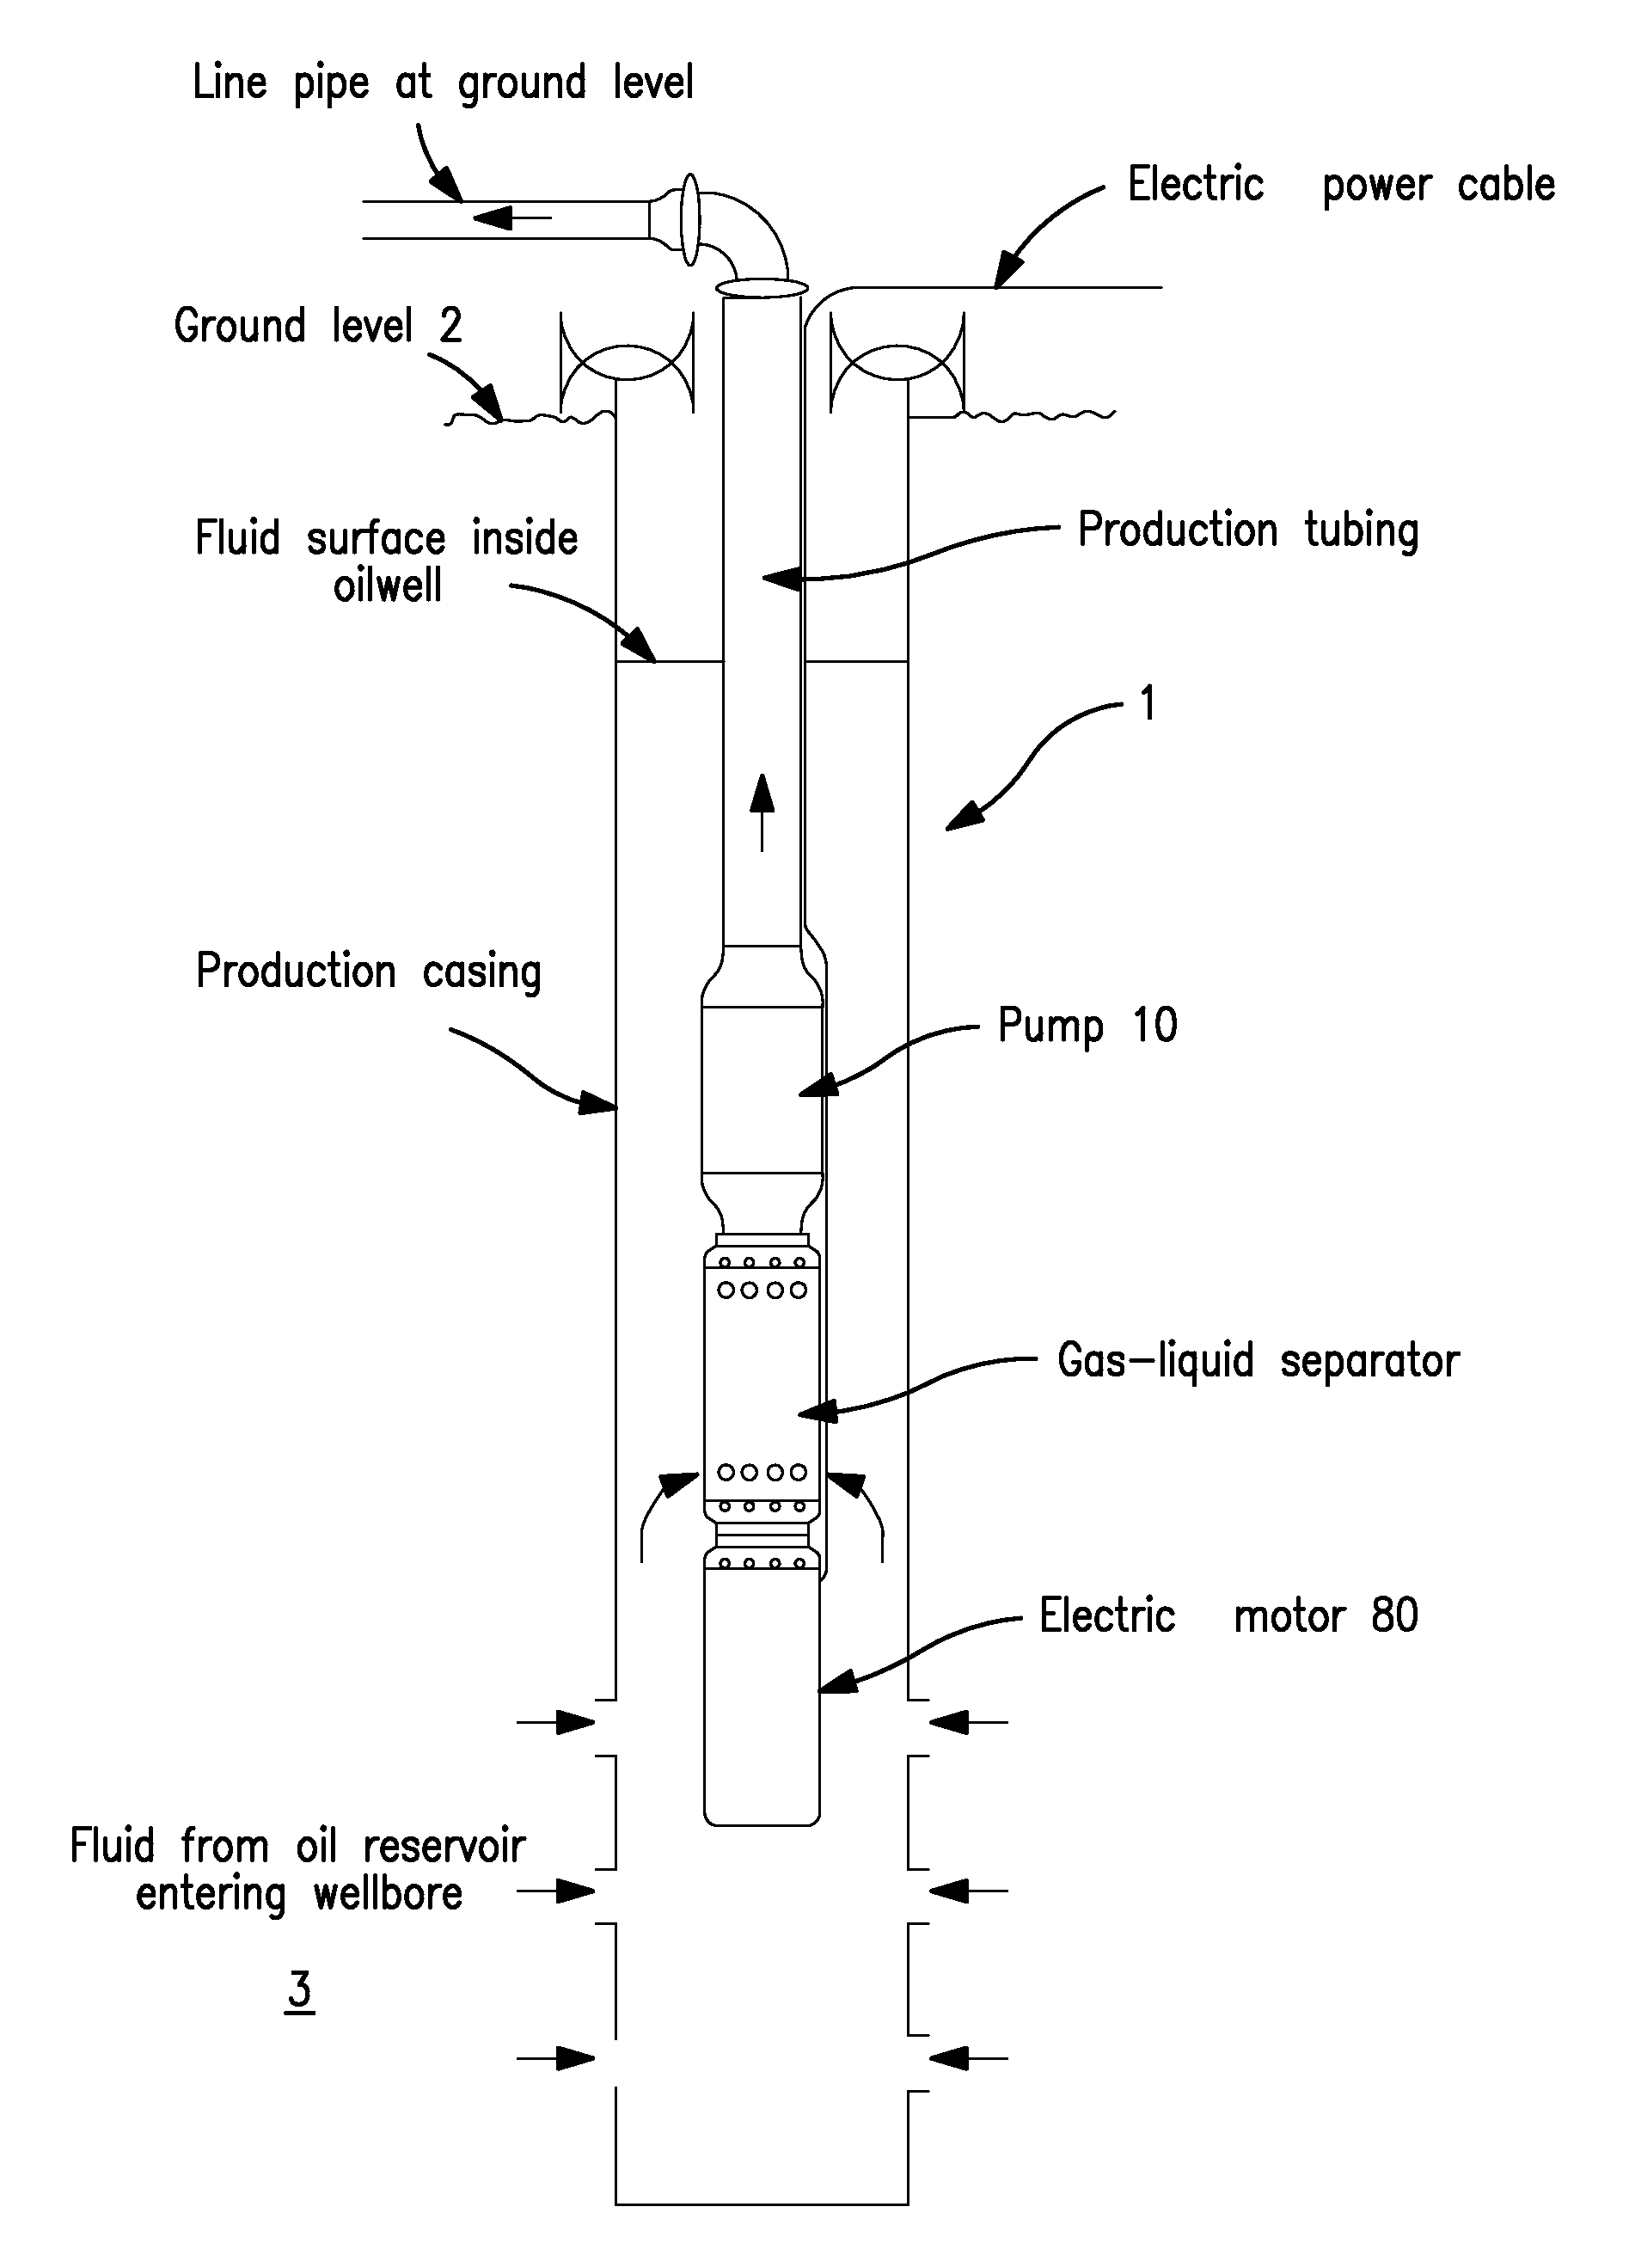 Fluid displacement system using gerotor pump